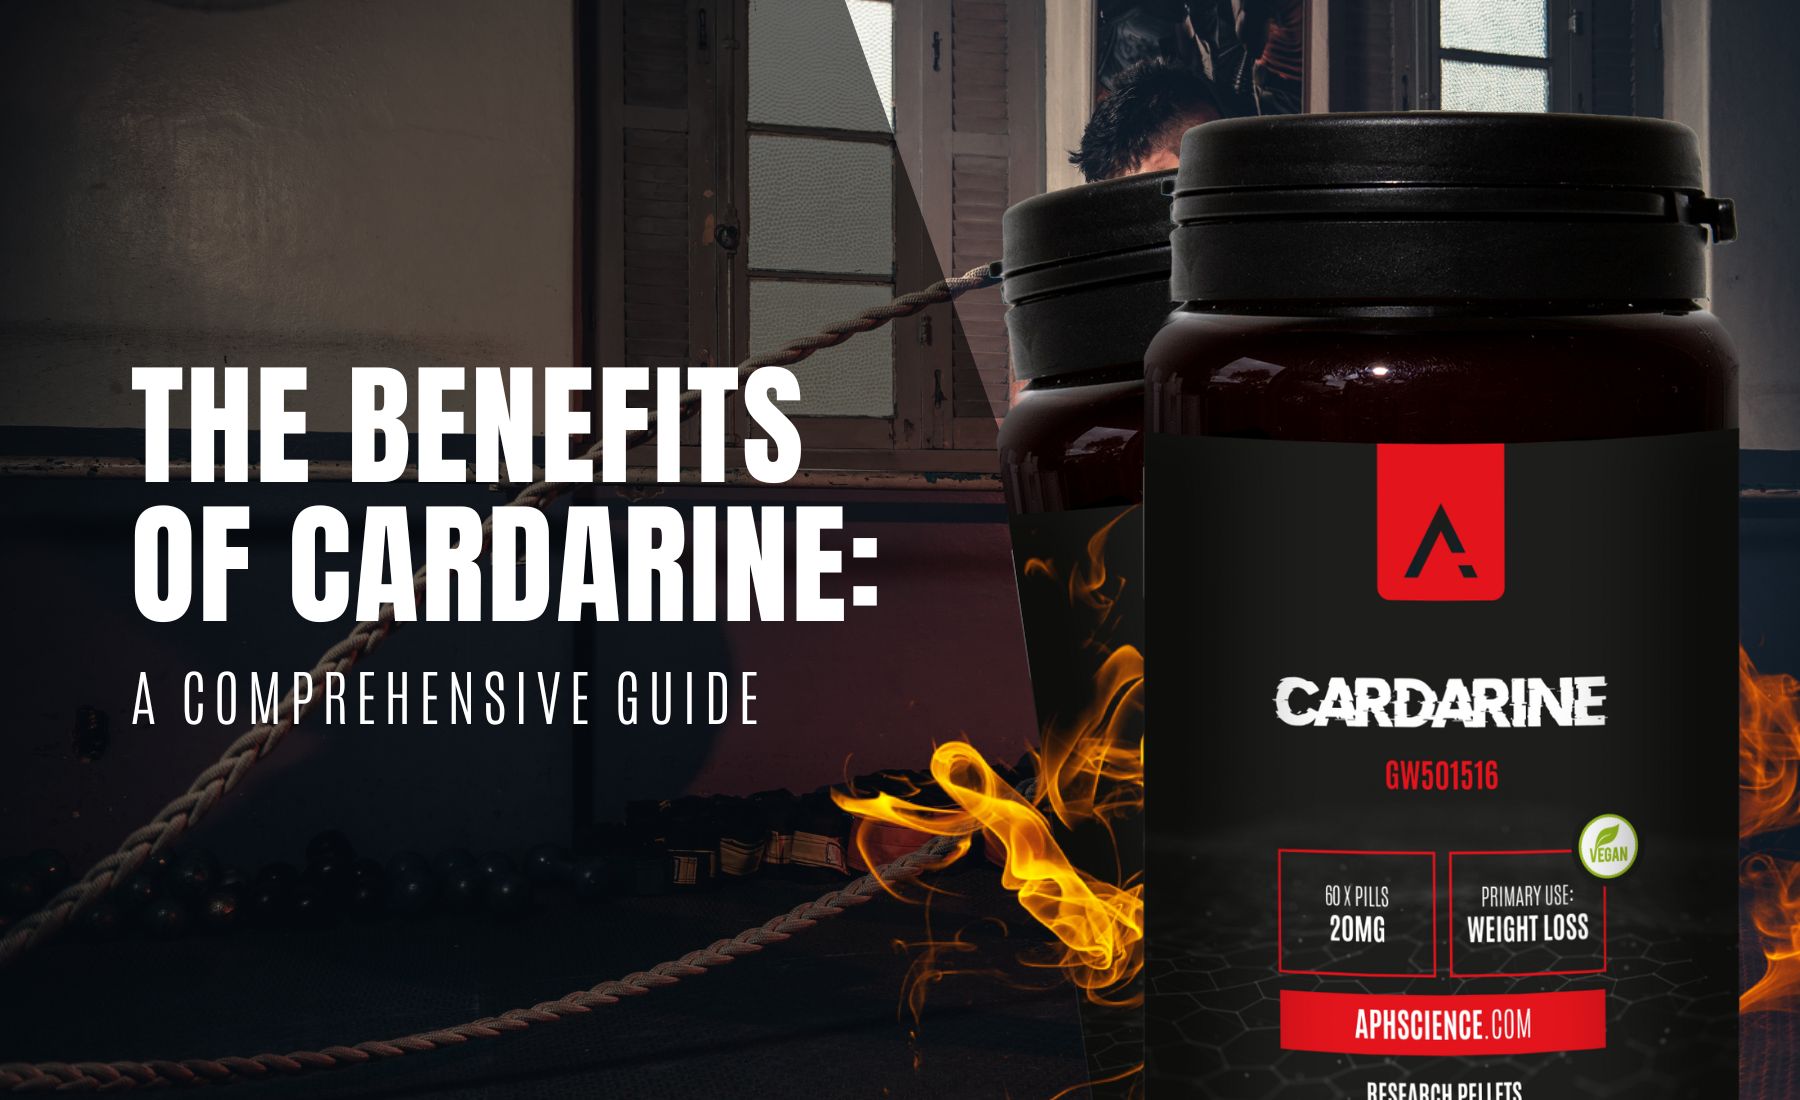 The Benefits of Cardarine: A Comprehensive Guide